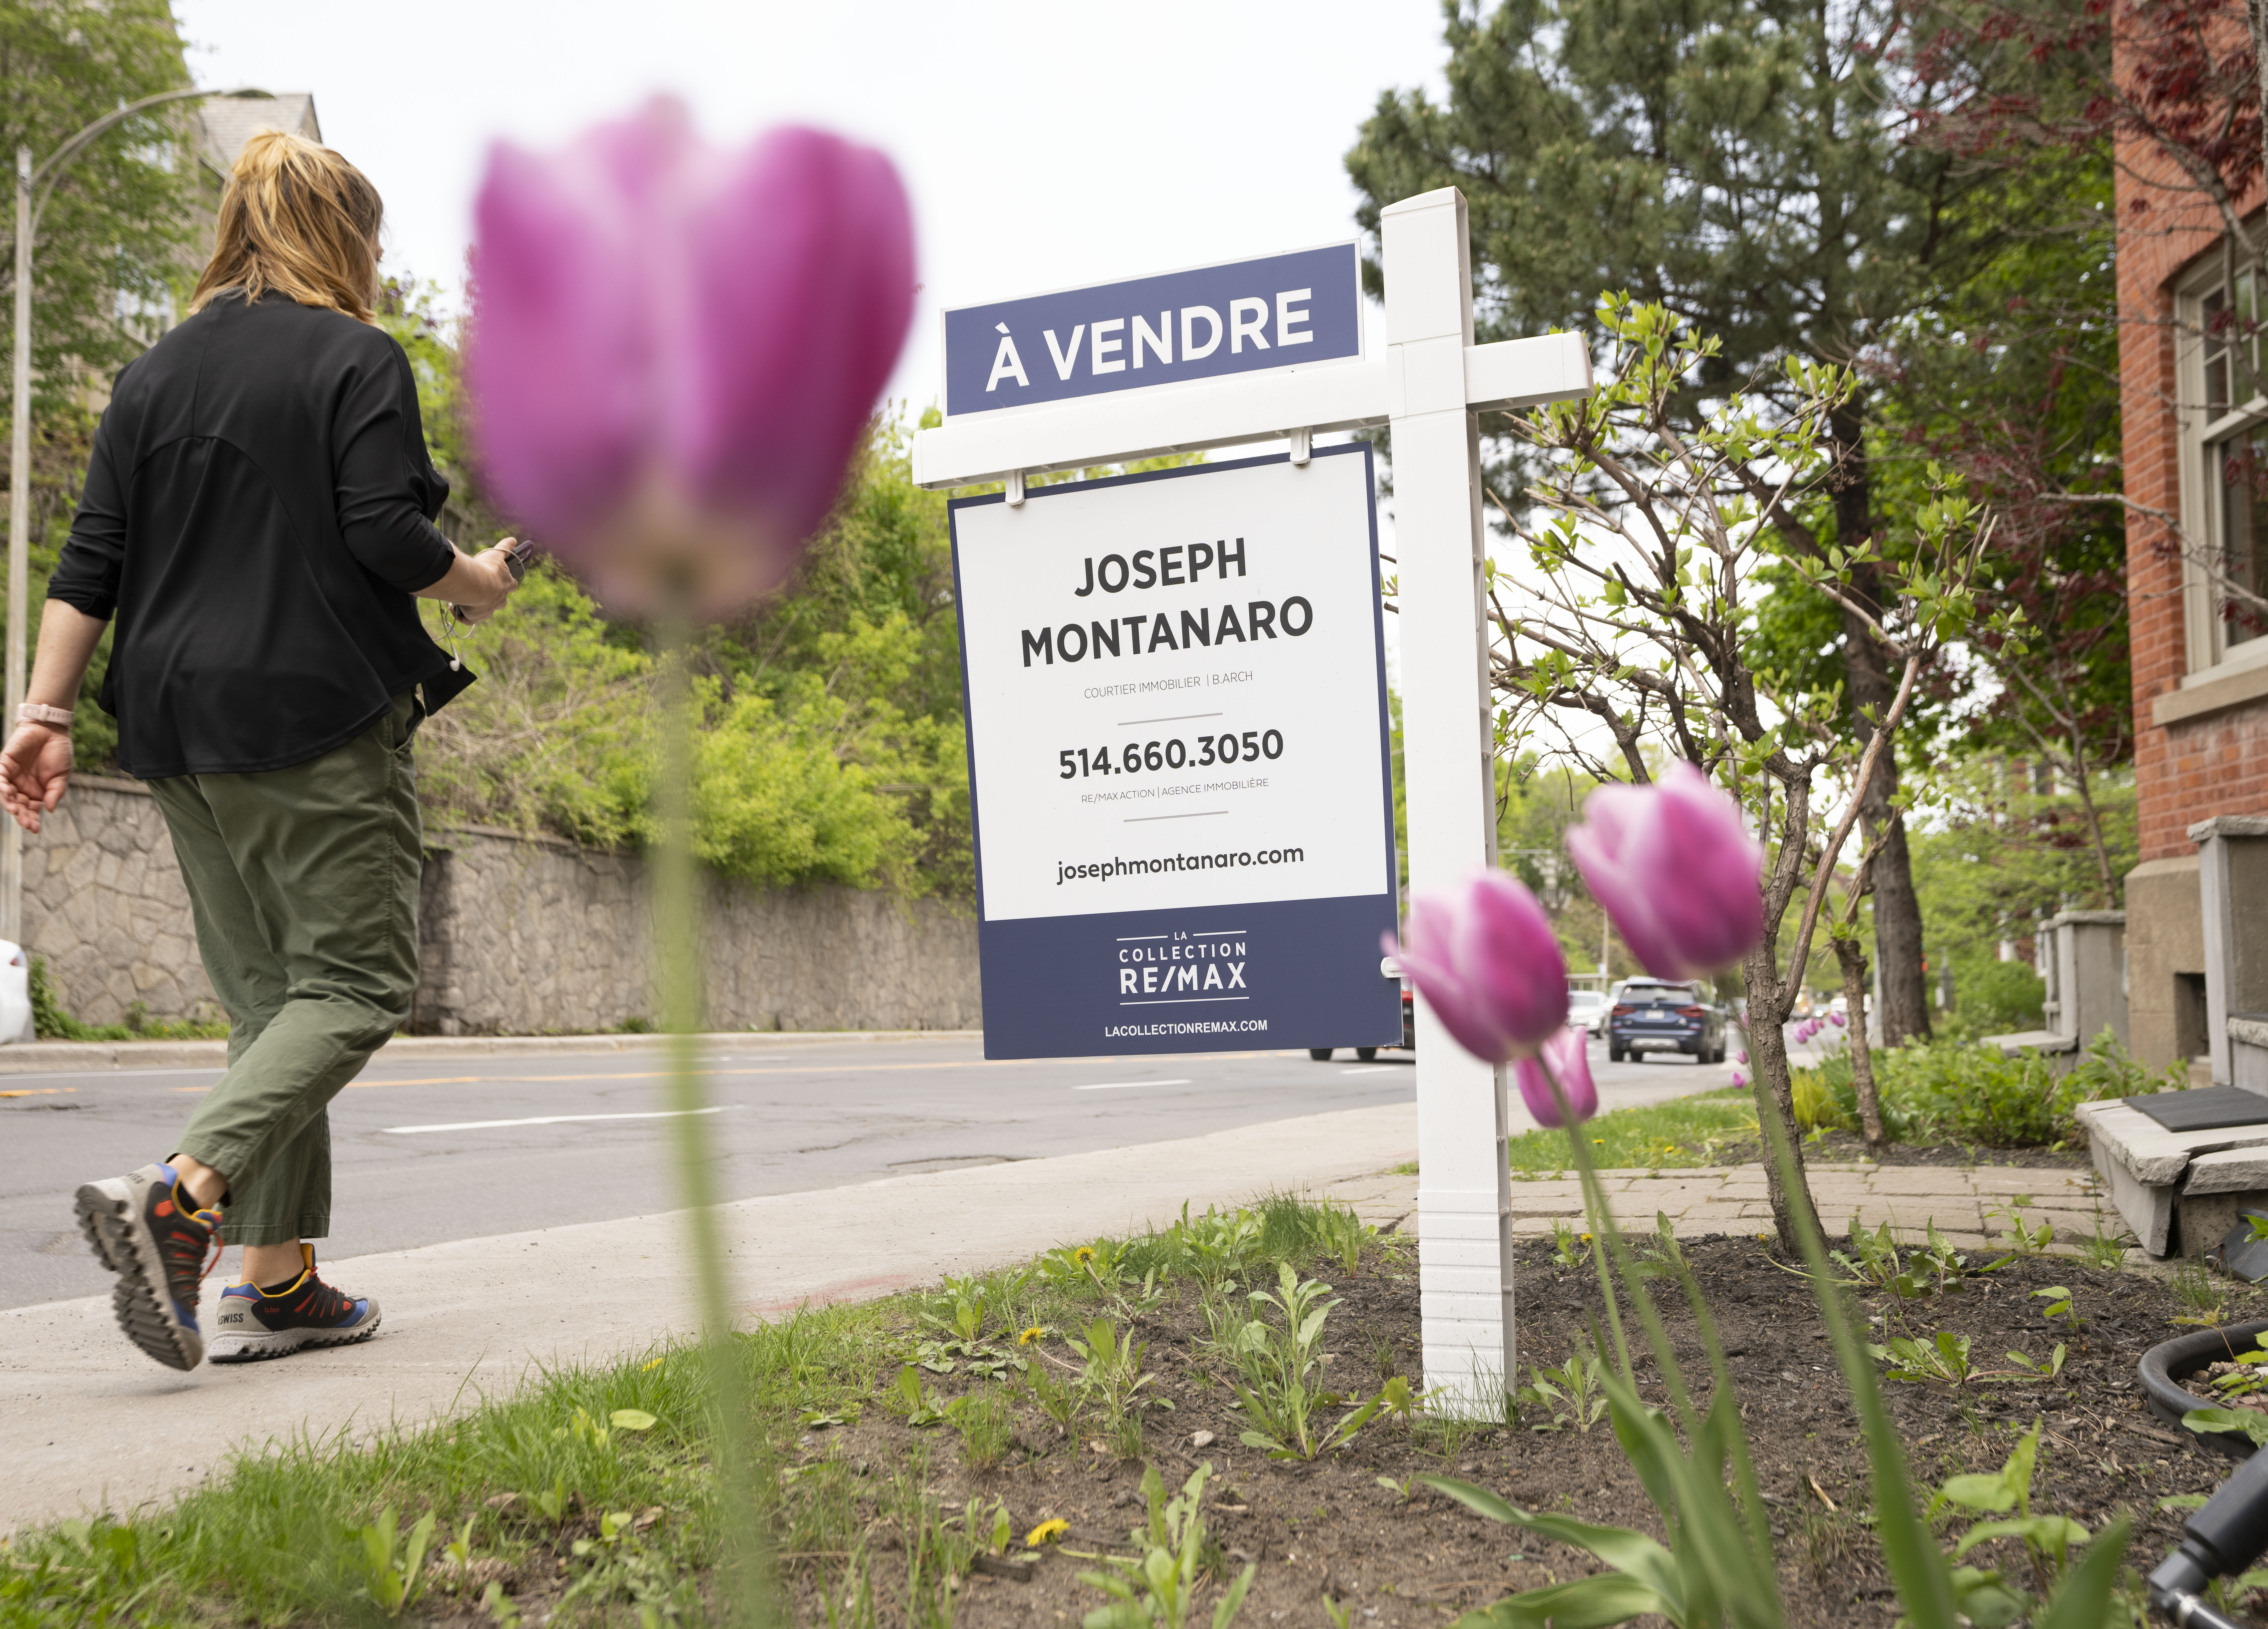 Montreal home sales on uptick as prices rise from last May